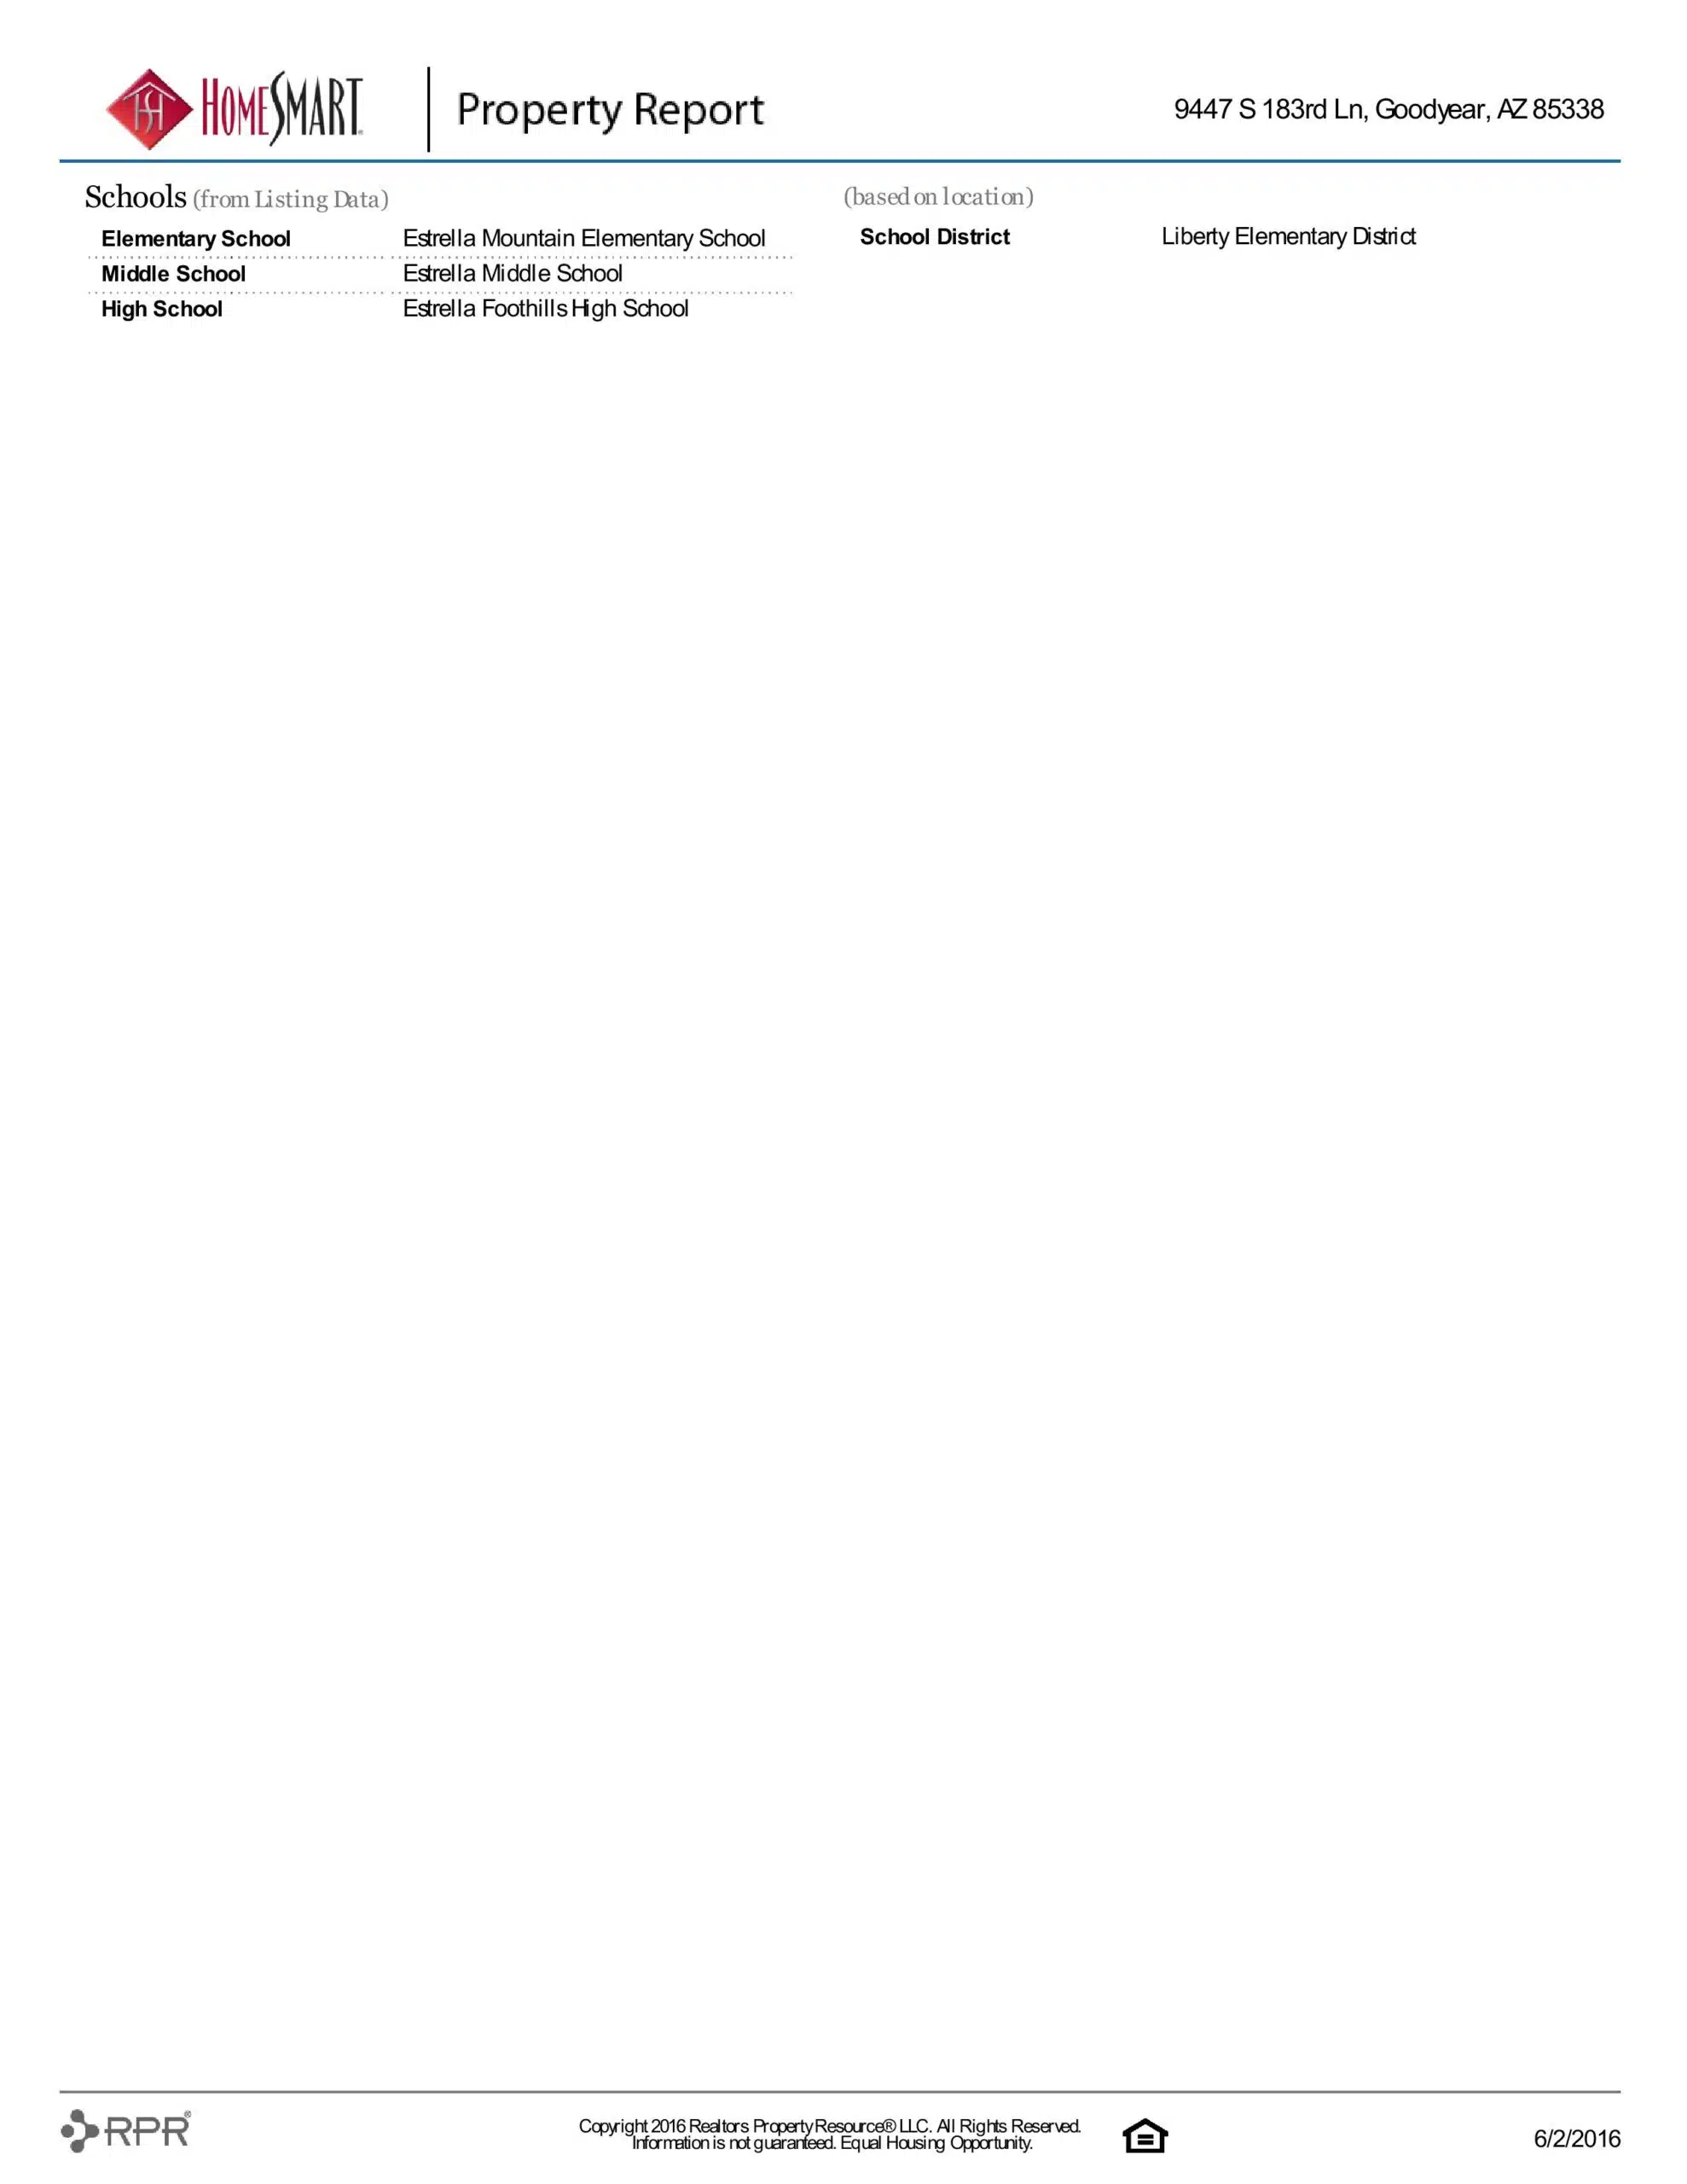 9447 S 183RD LANE PROPERTY REPORT-page-005